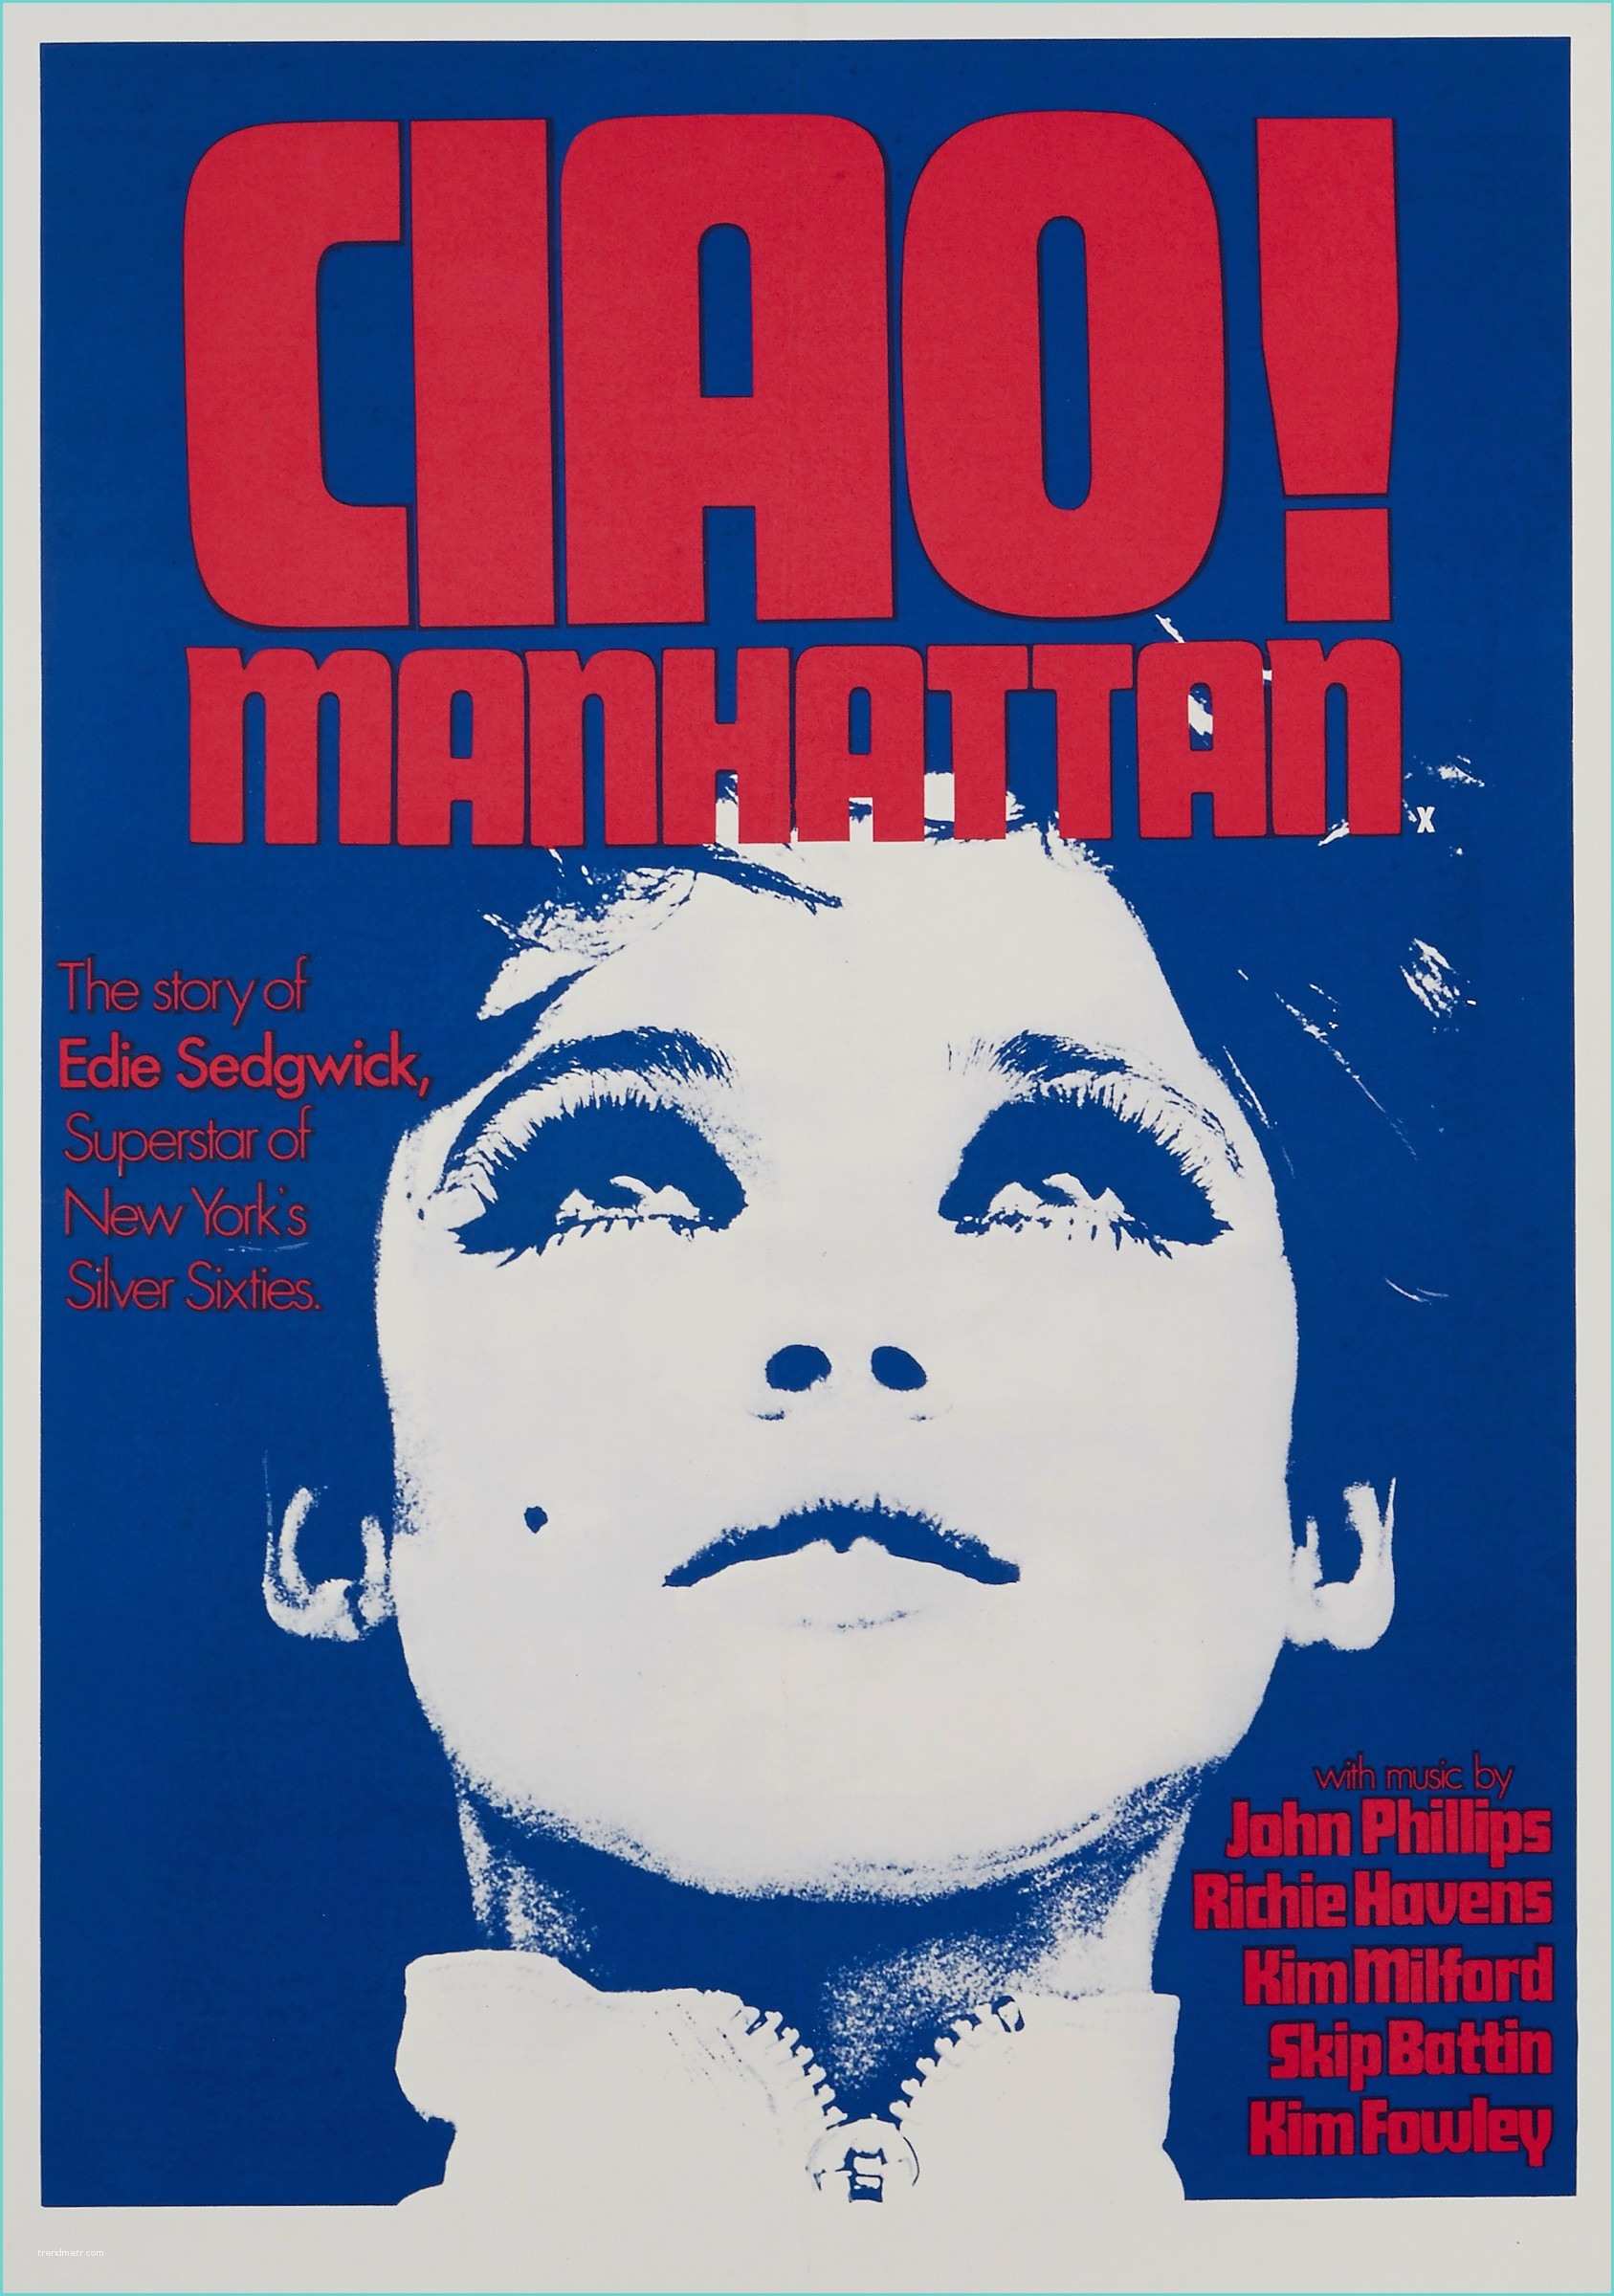 Allposters Return Policy Ciao Manhattan 1973